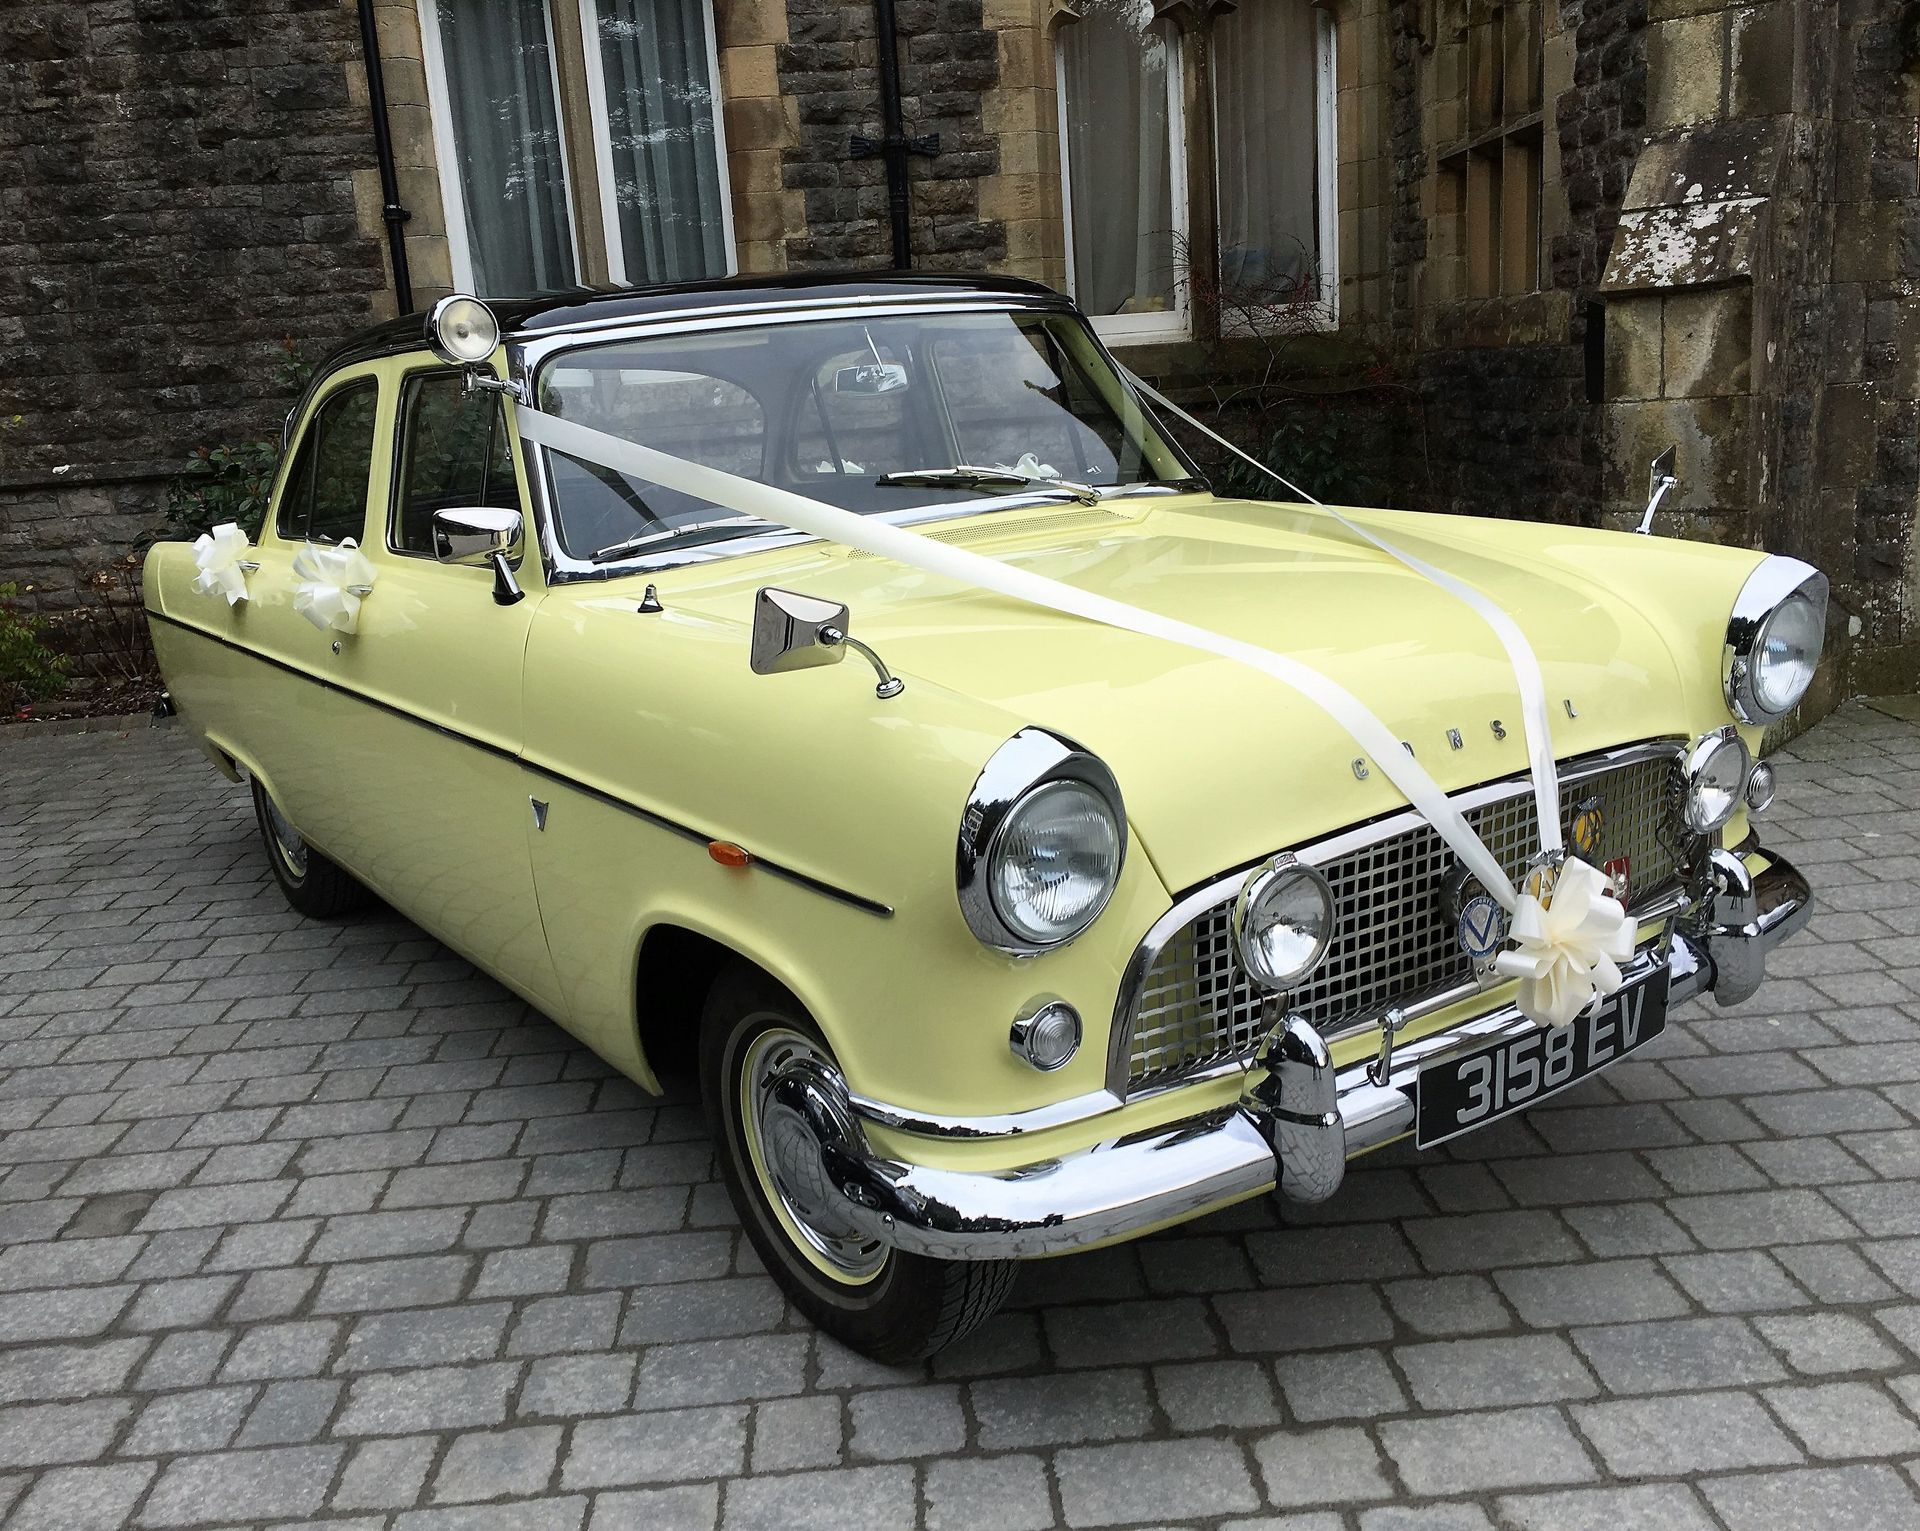 Close-up of a 1959 Ford Consul in its original primrose yellow, decorated with white bows, ready to pick up the newlyweds